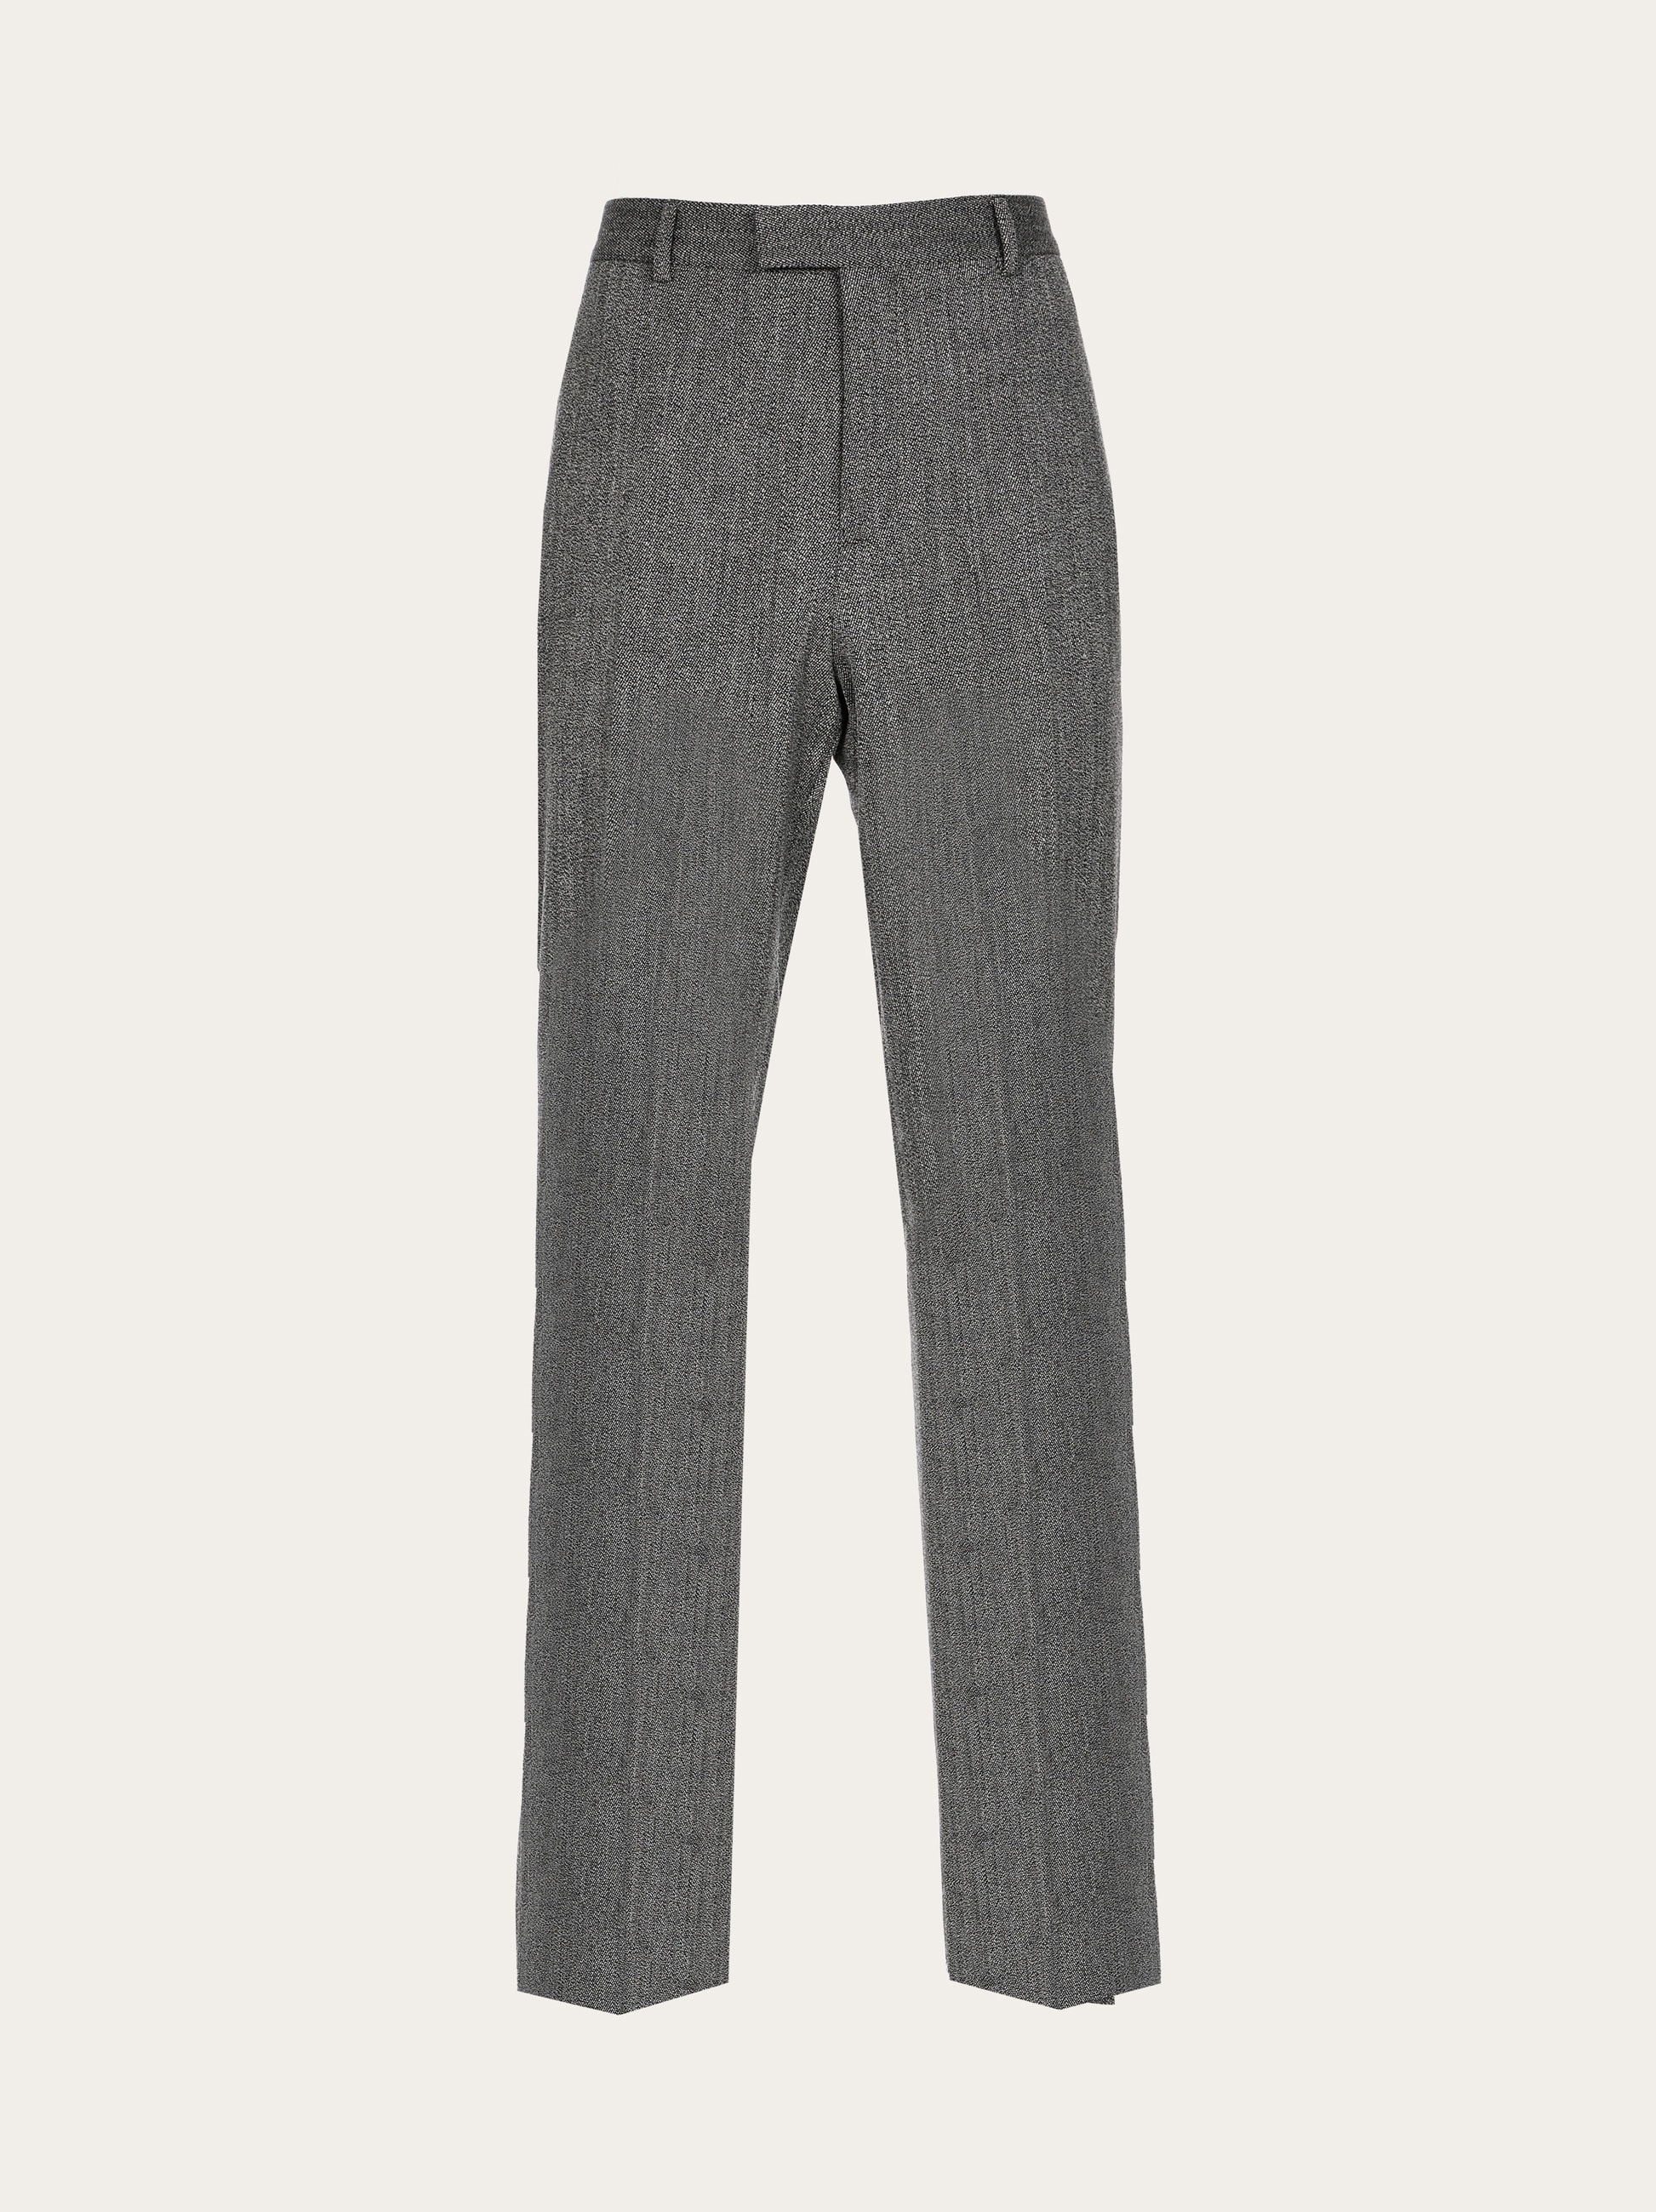 Flat front tailored trouser - 1